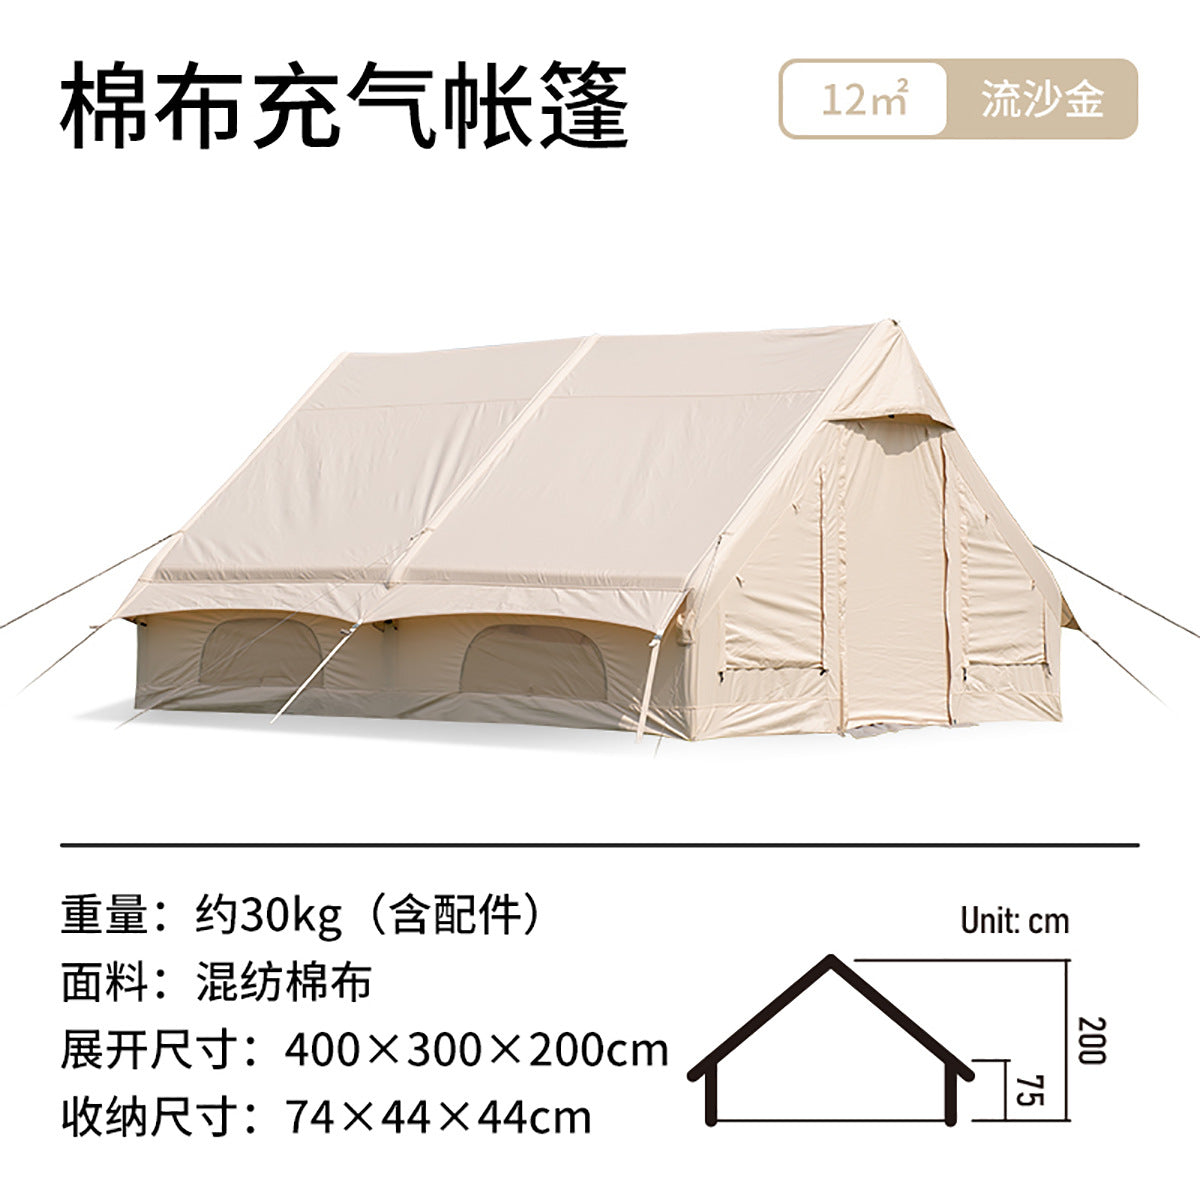 Portable insulation inflatable tent outdoor camping cotton tent - Tesery Official Store - Tesla Premium Accessories Store